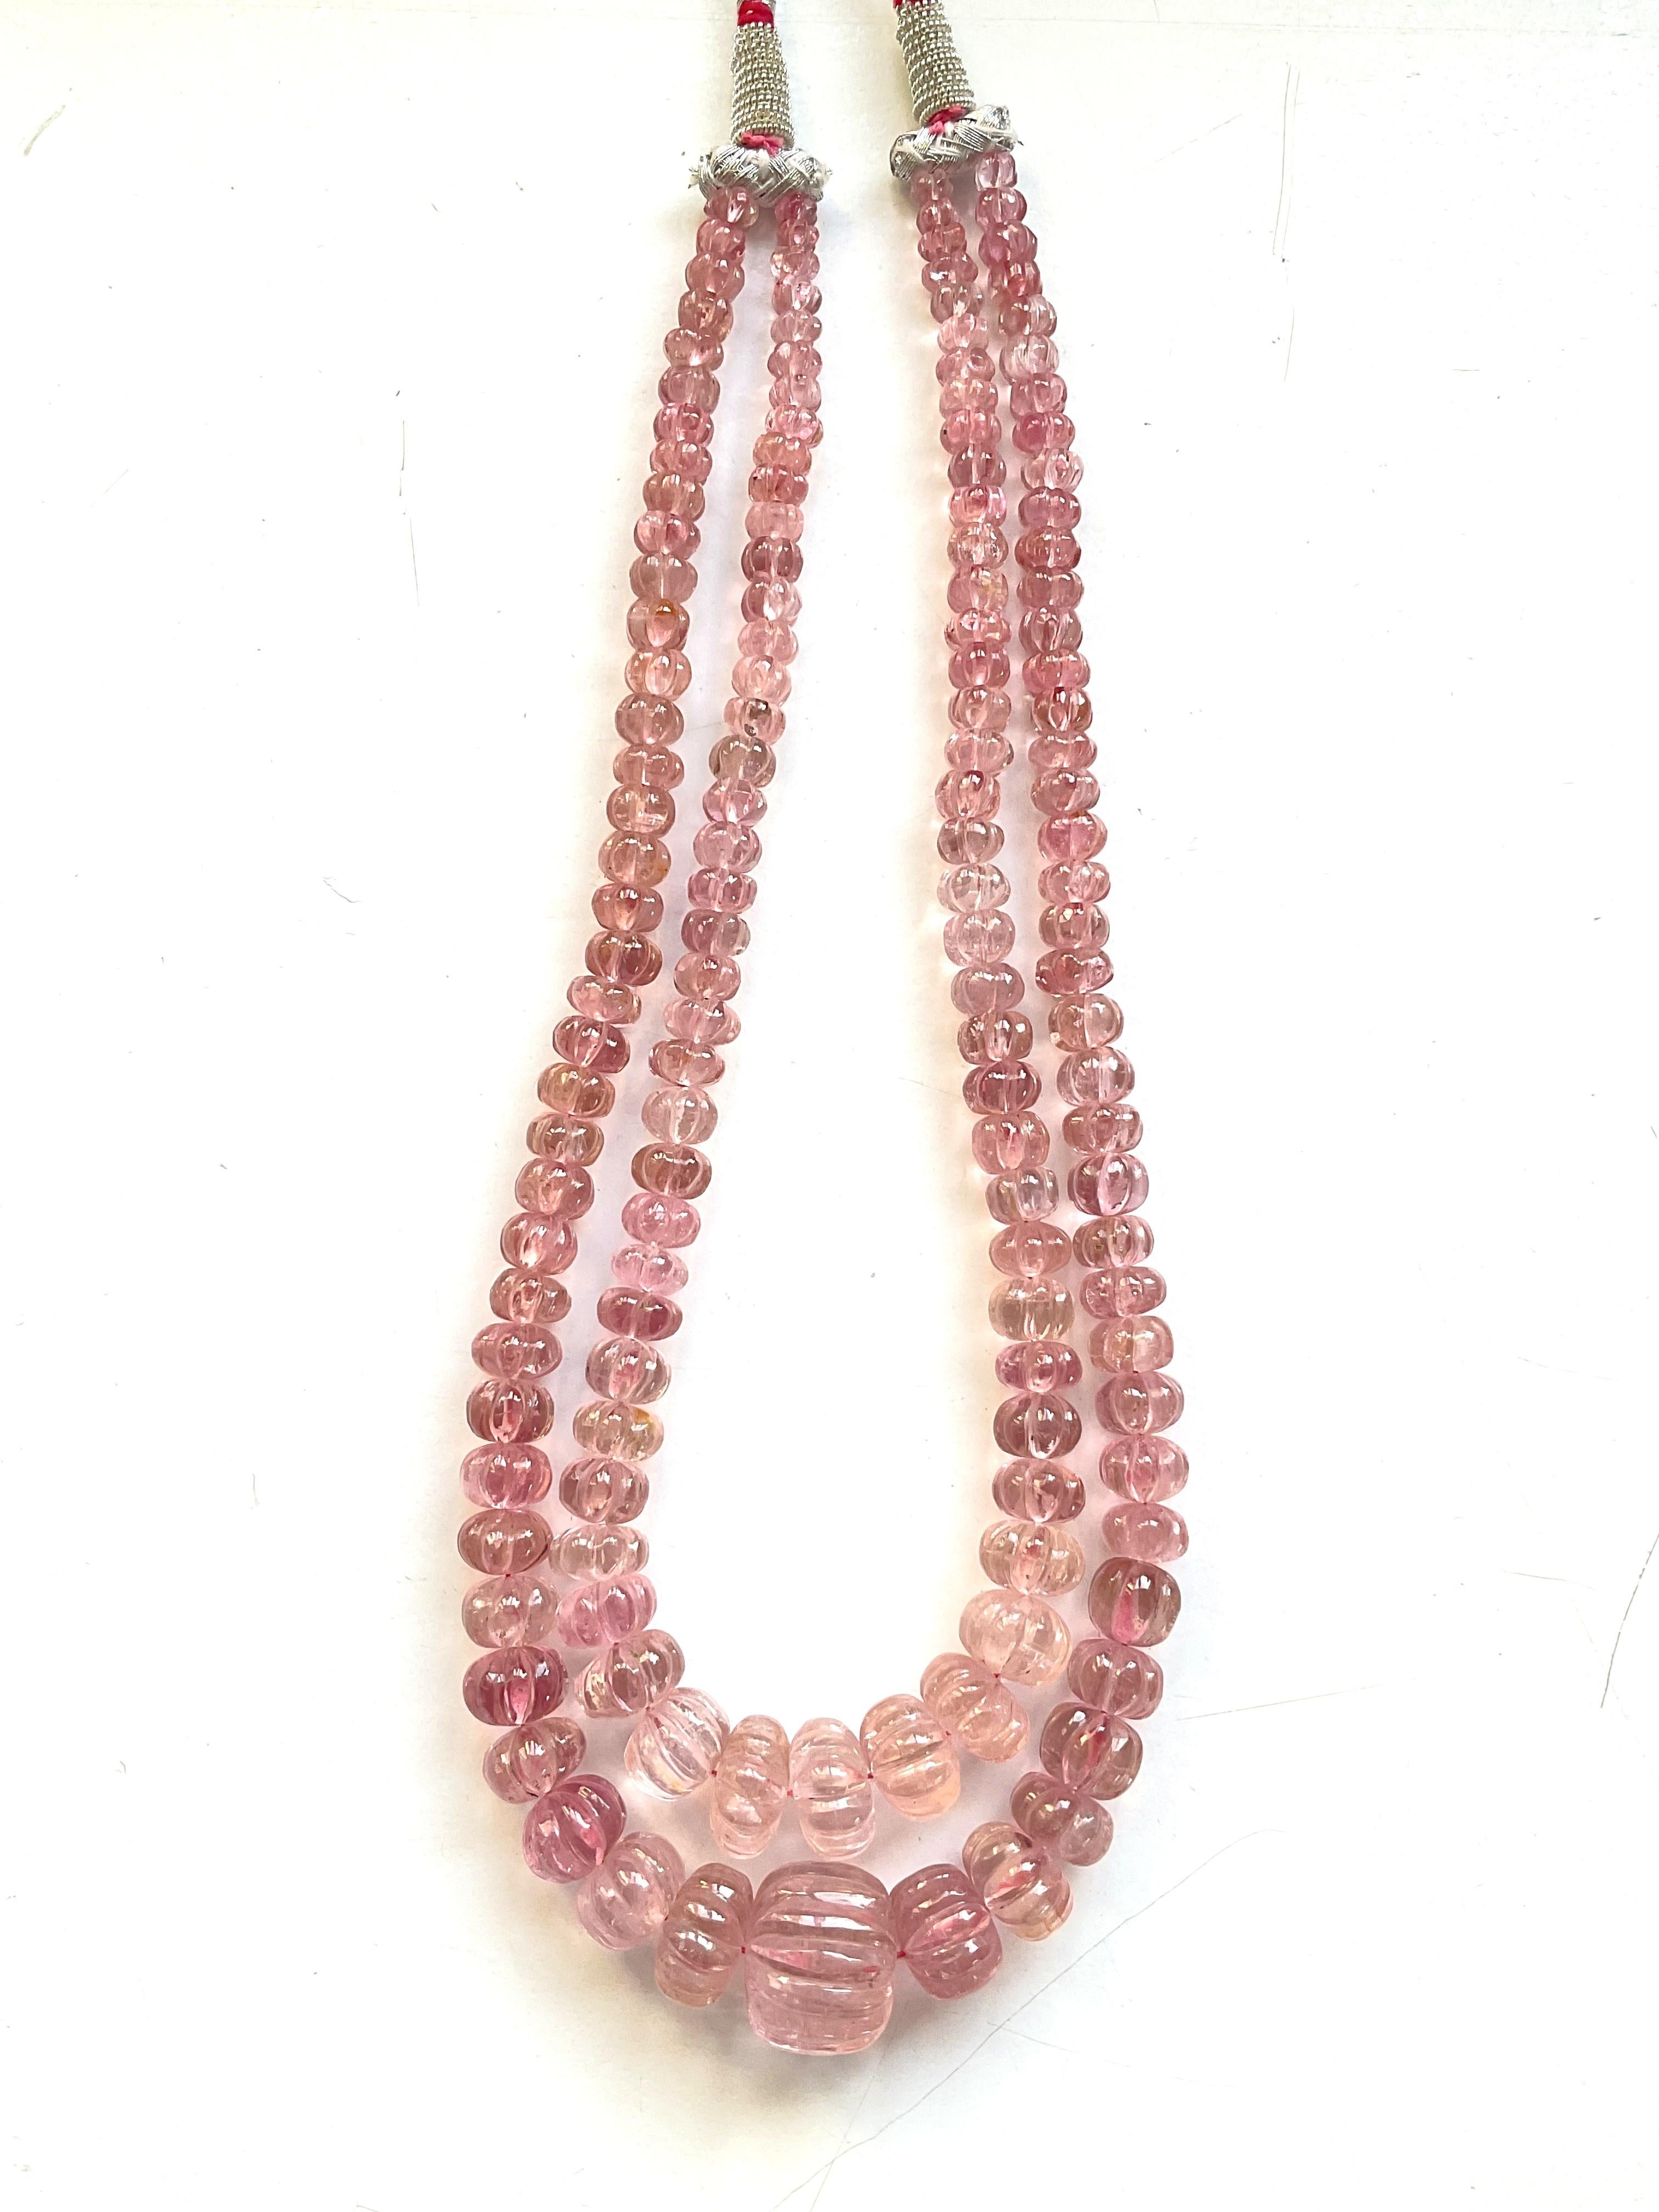 396.95 Carats pink Tourmaline carved melon beads necklace Jewelry Natural Gem For Sale 1